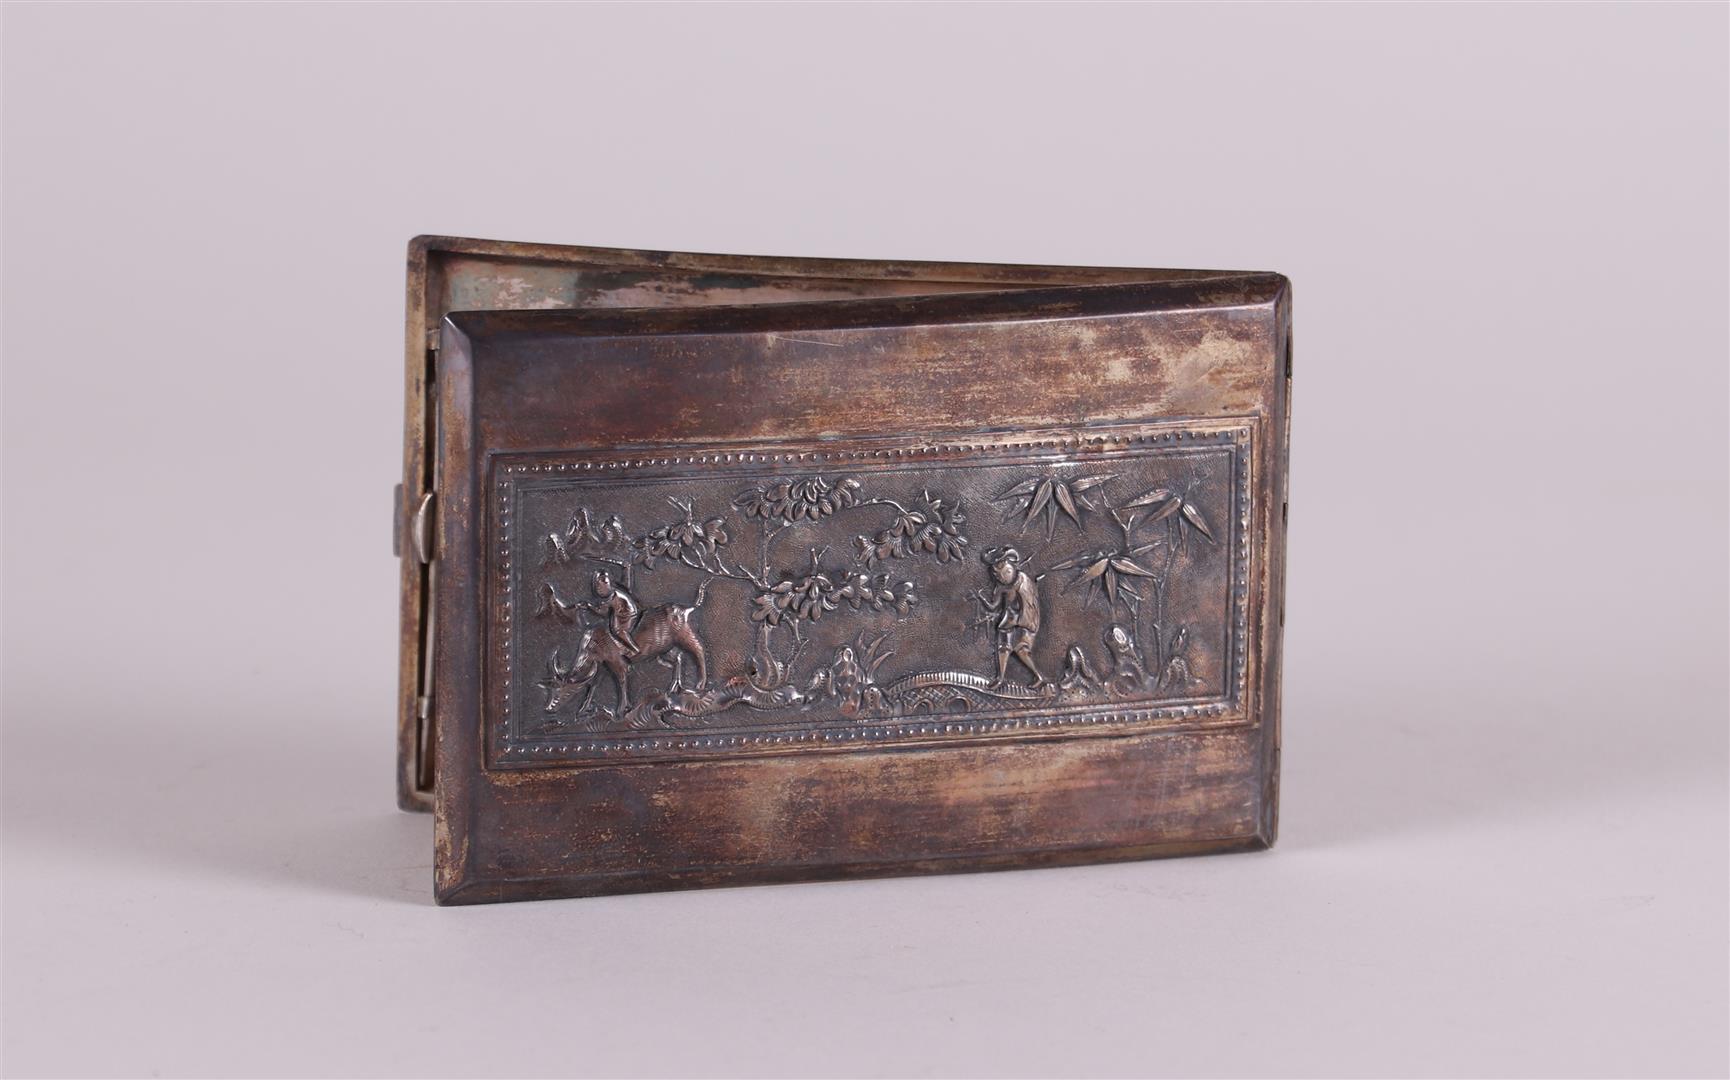 A 'Djokja' silver cigarette case decorated with figures in a landscape. China, 20th century.